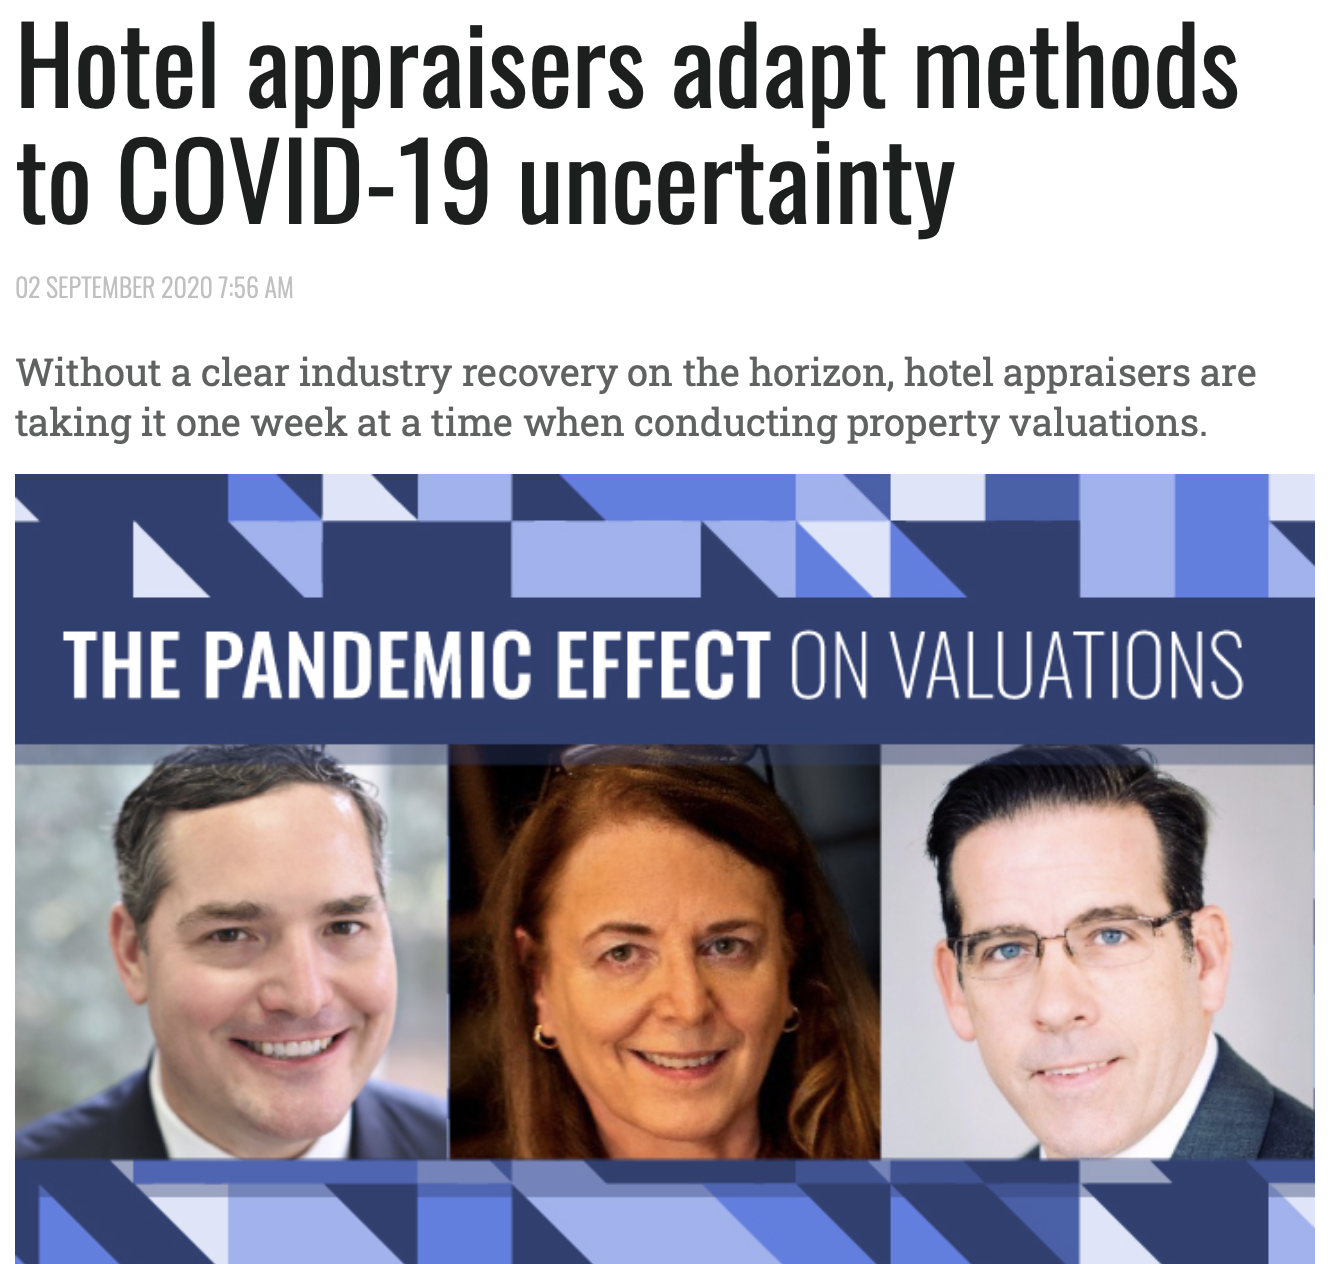 Hotel appraisers adapt methods to COVID-19 uncertainty